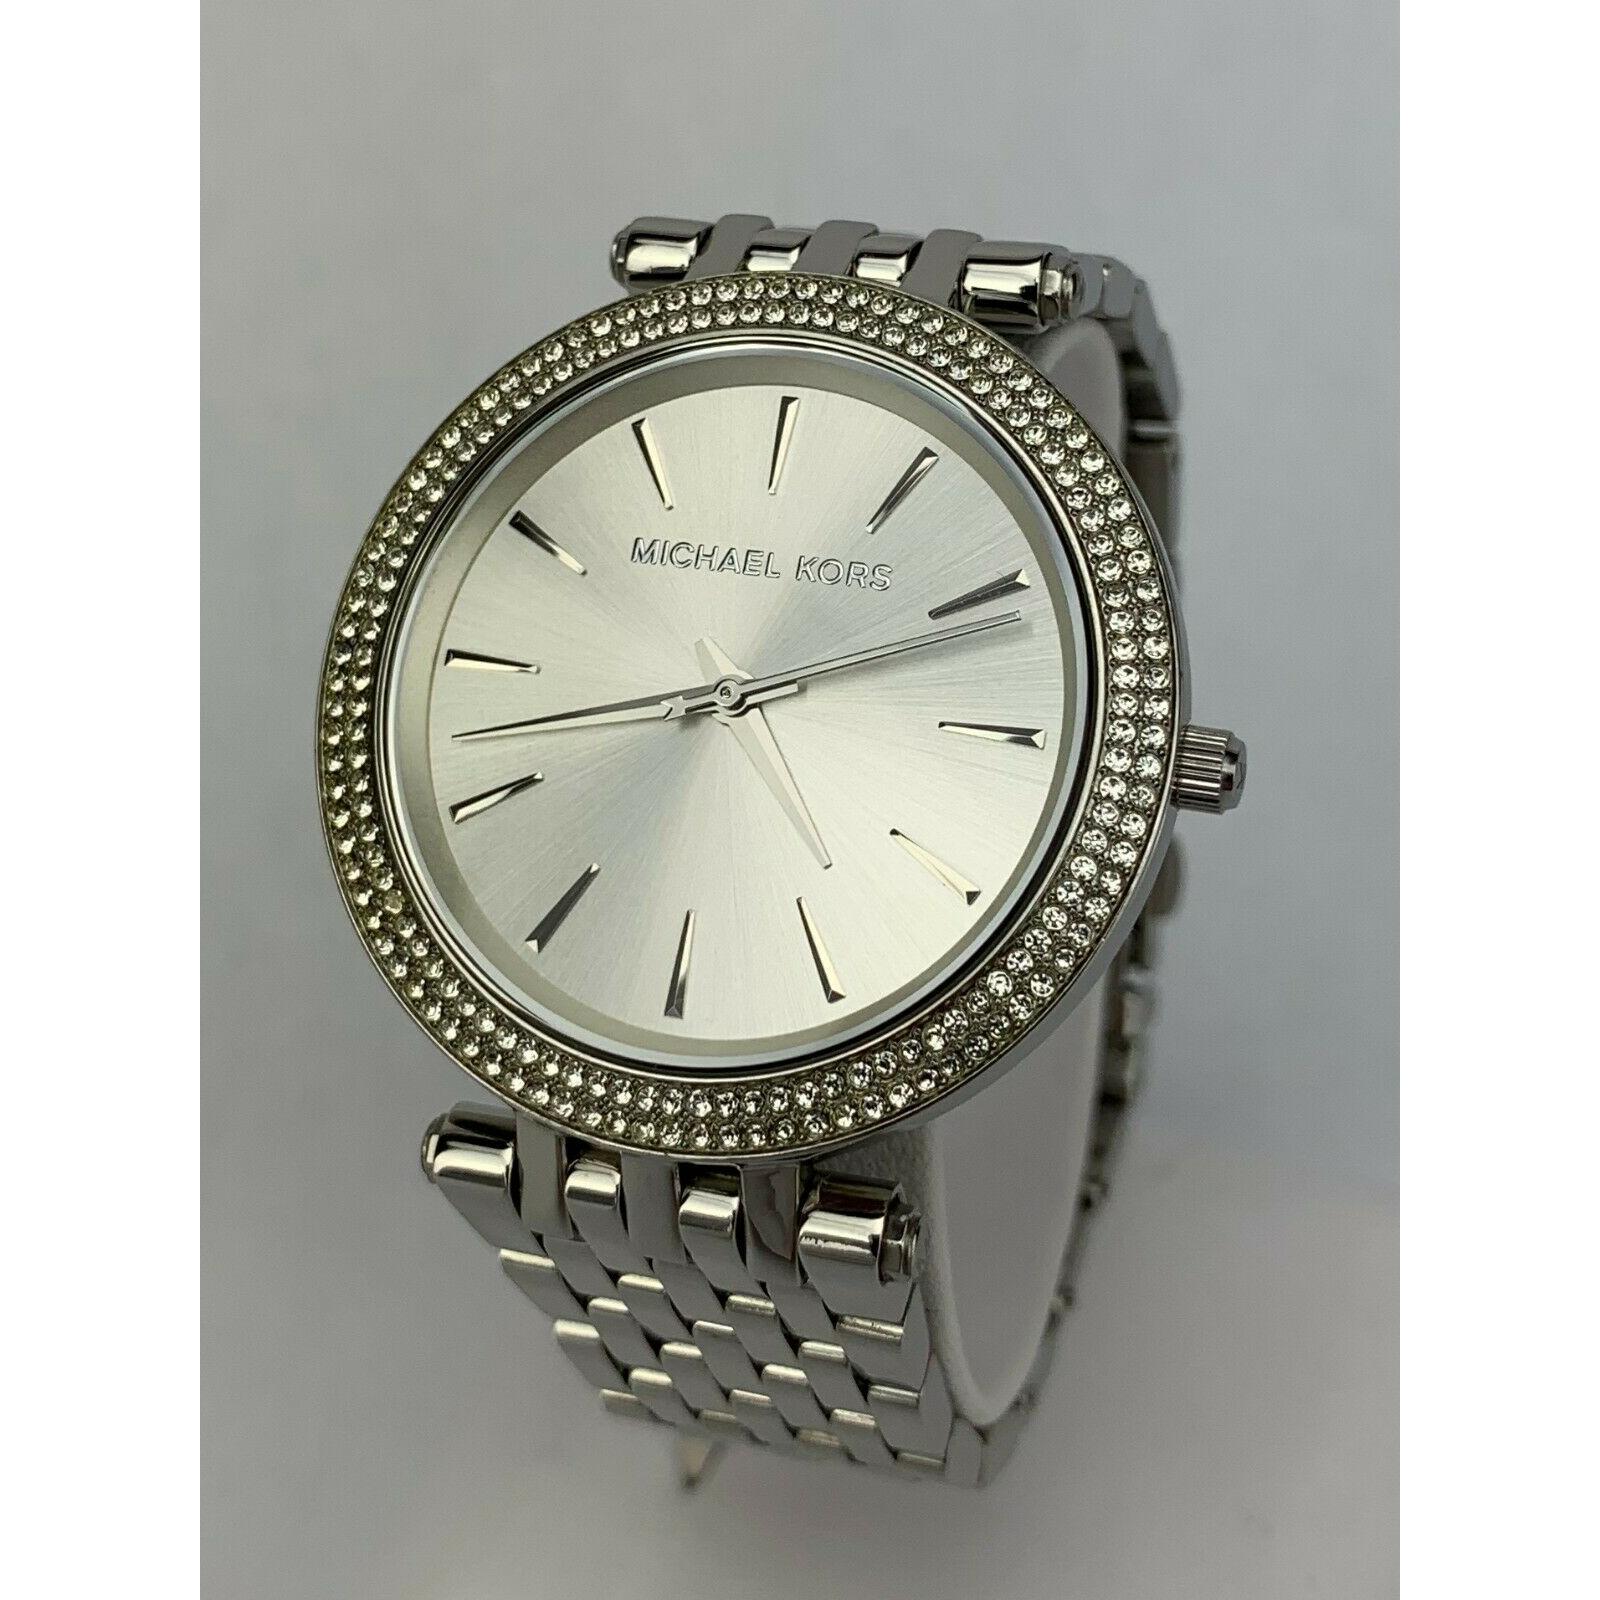 Michael Kors Silver tone Darci Watch MK-3190 | Barry's Pawn and Jewelry